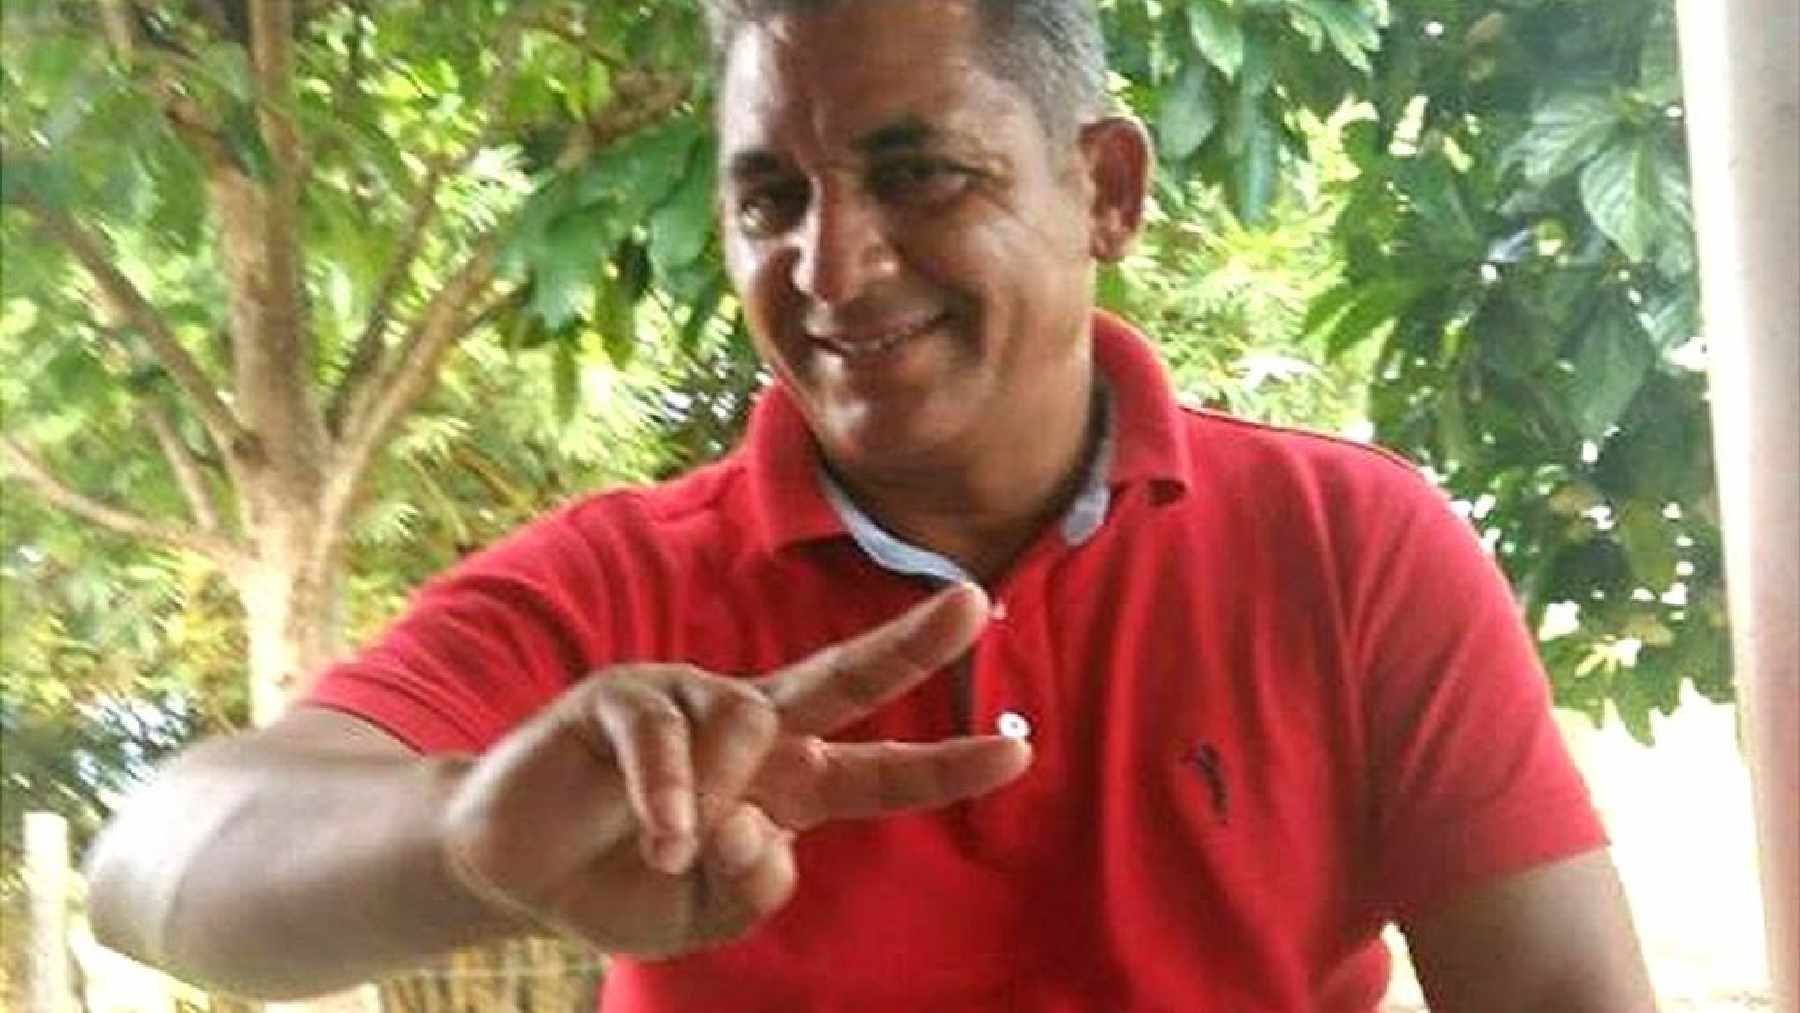 Waldomiro Costa Pereira was killed while recovering in hospital - MST